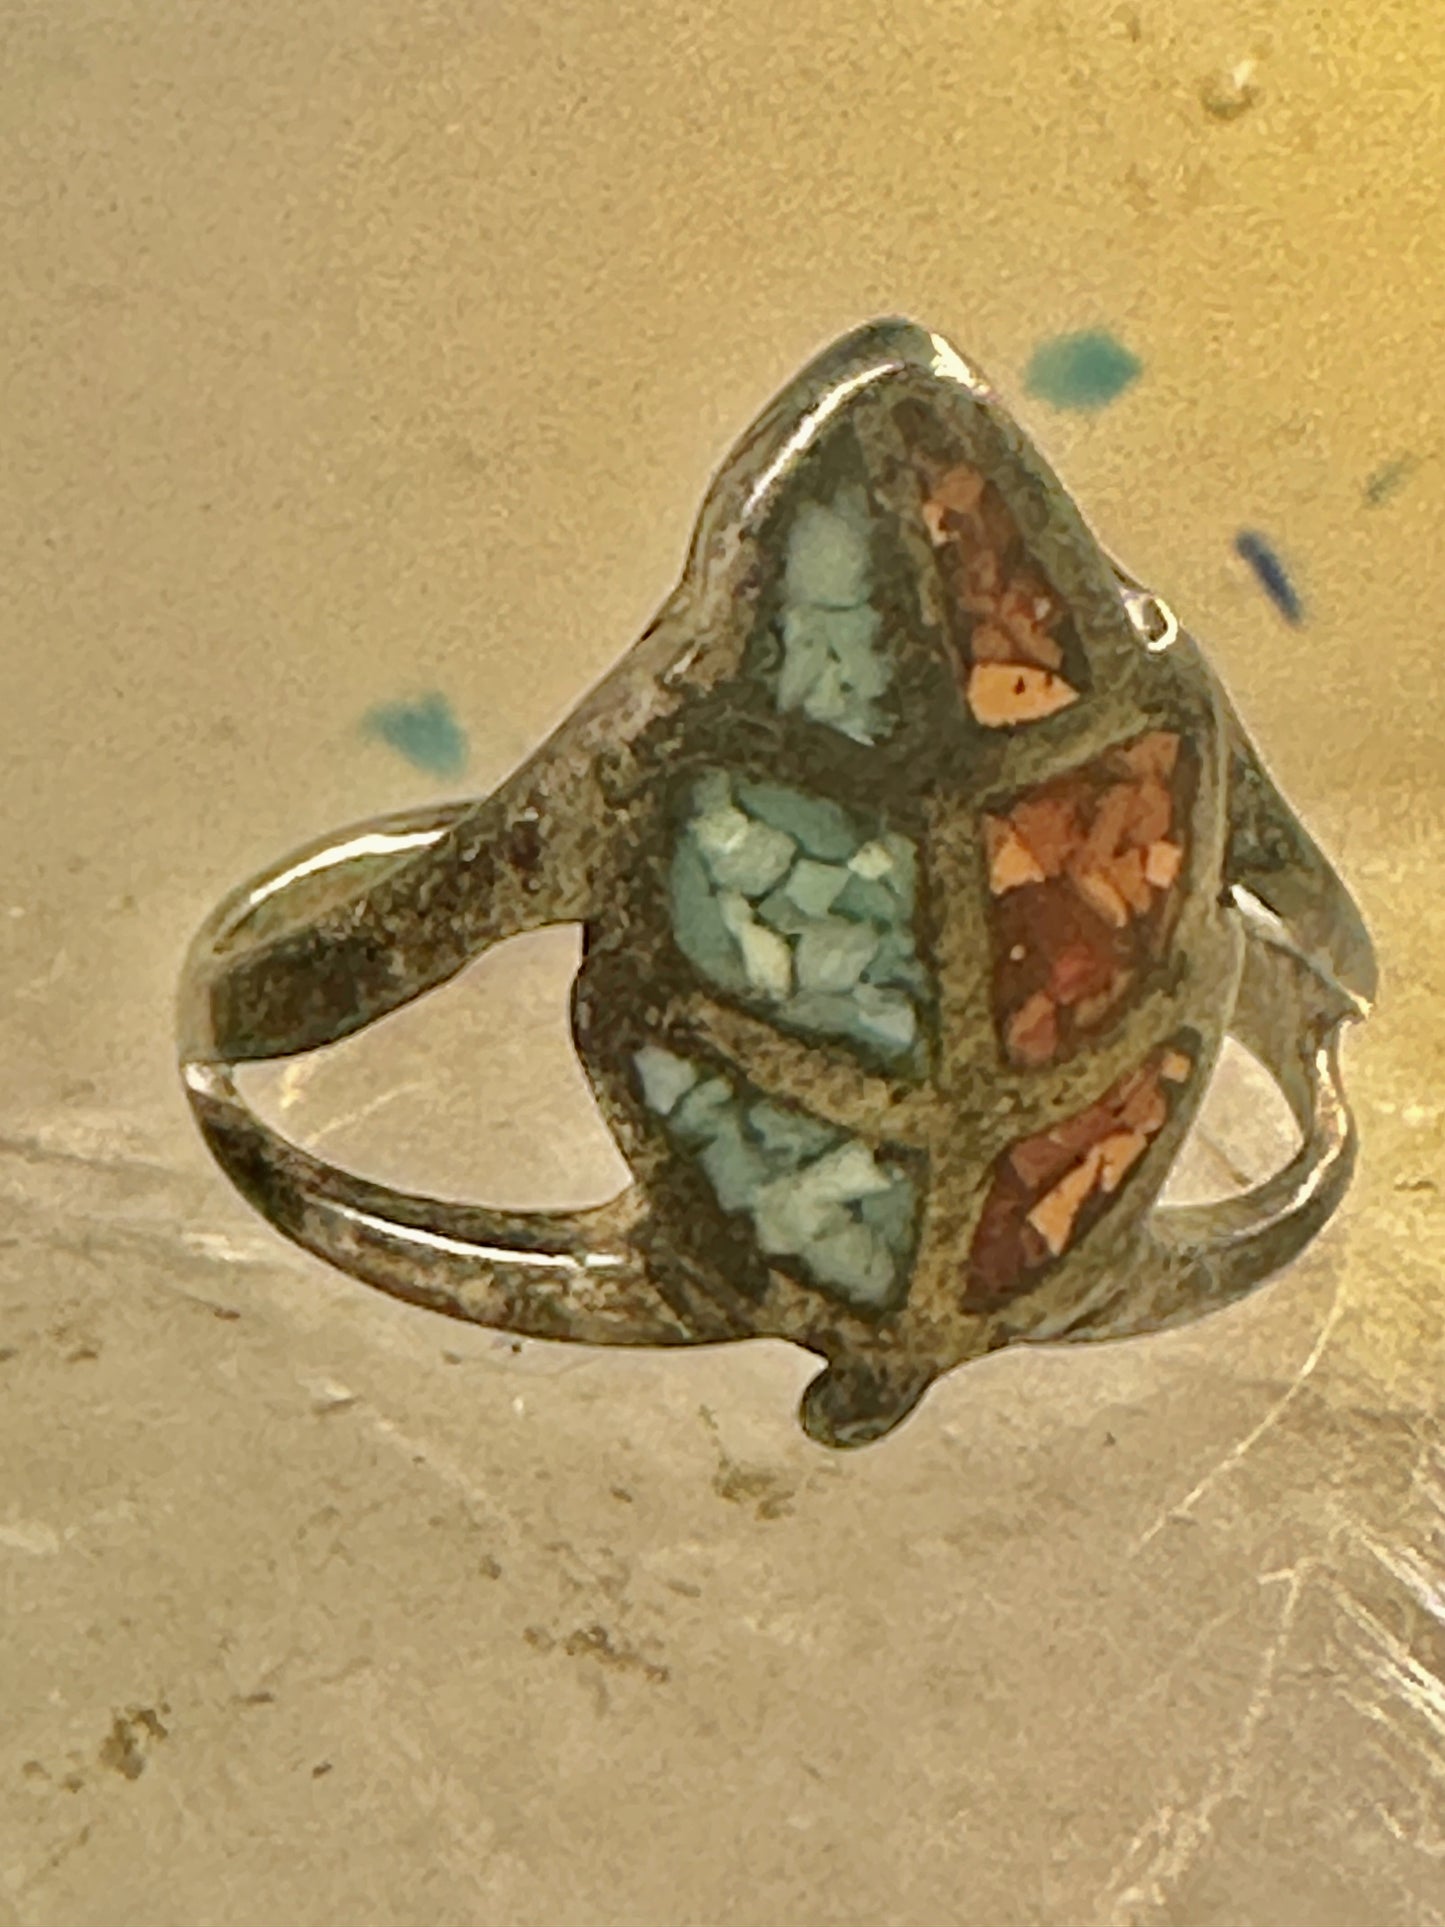 Leaf ring turquoise coral chips size 6.50 sterling silver women